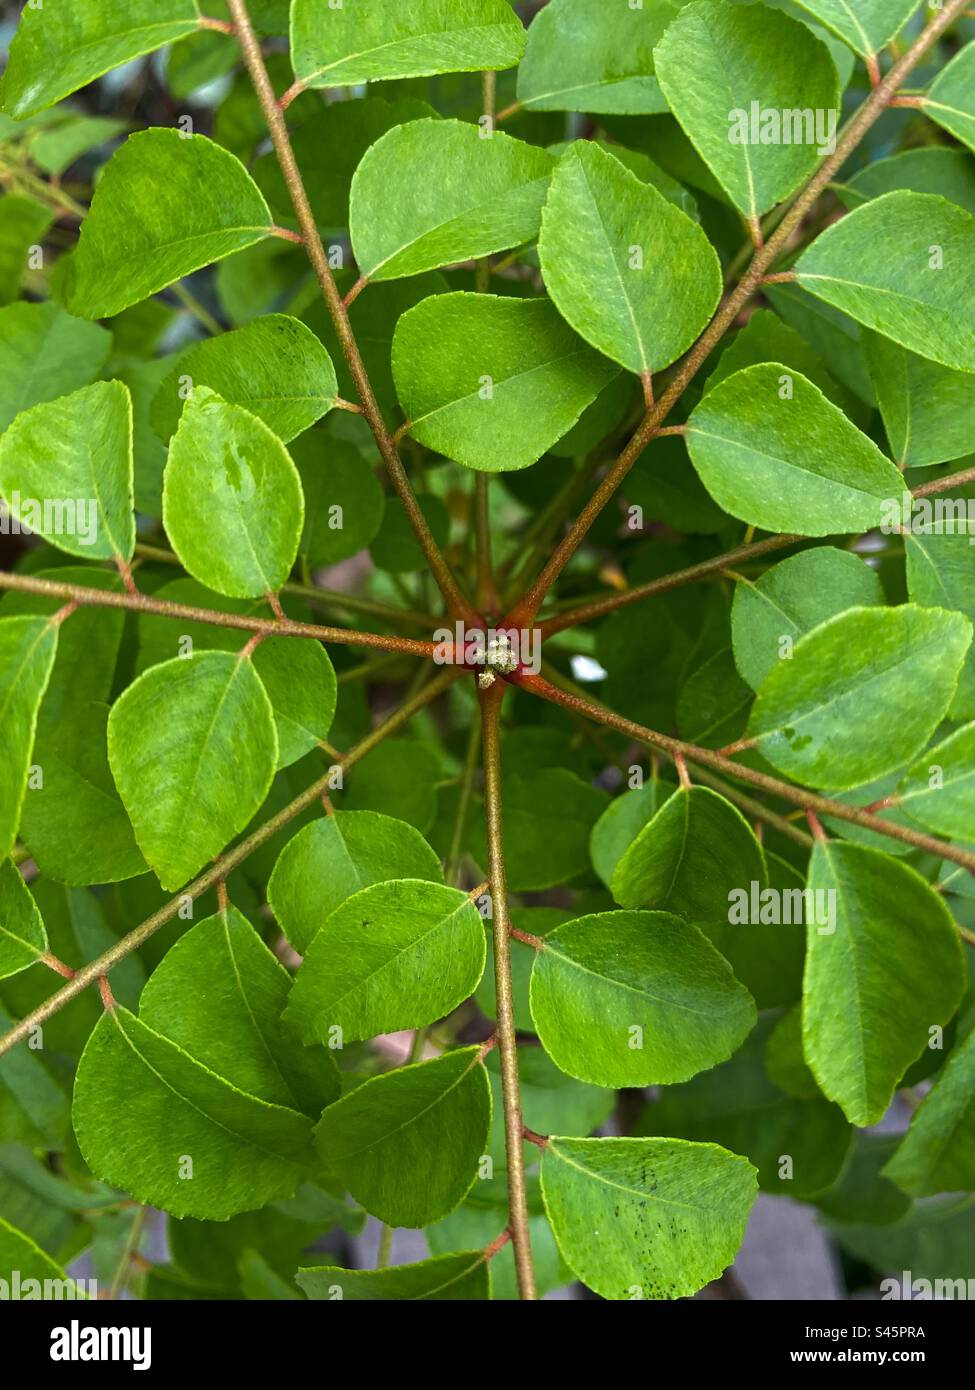 Outdoors photography of the curry’s leaves photoshoot Stock Photo